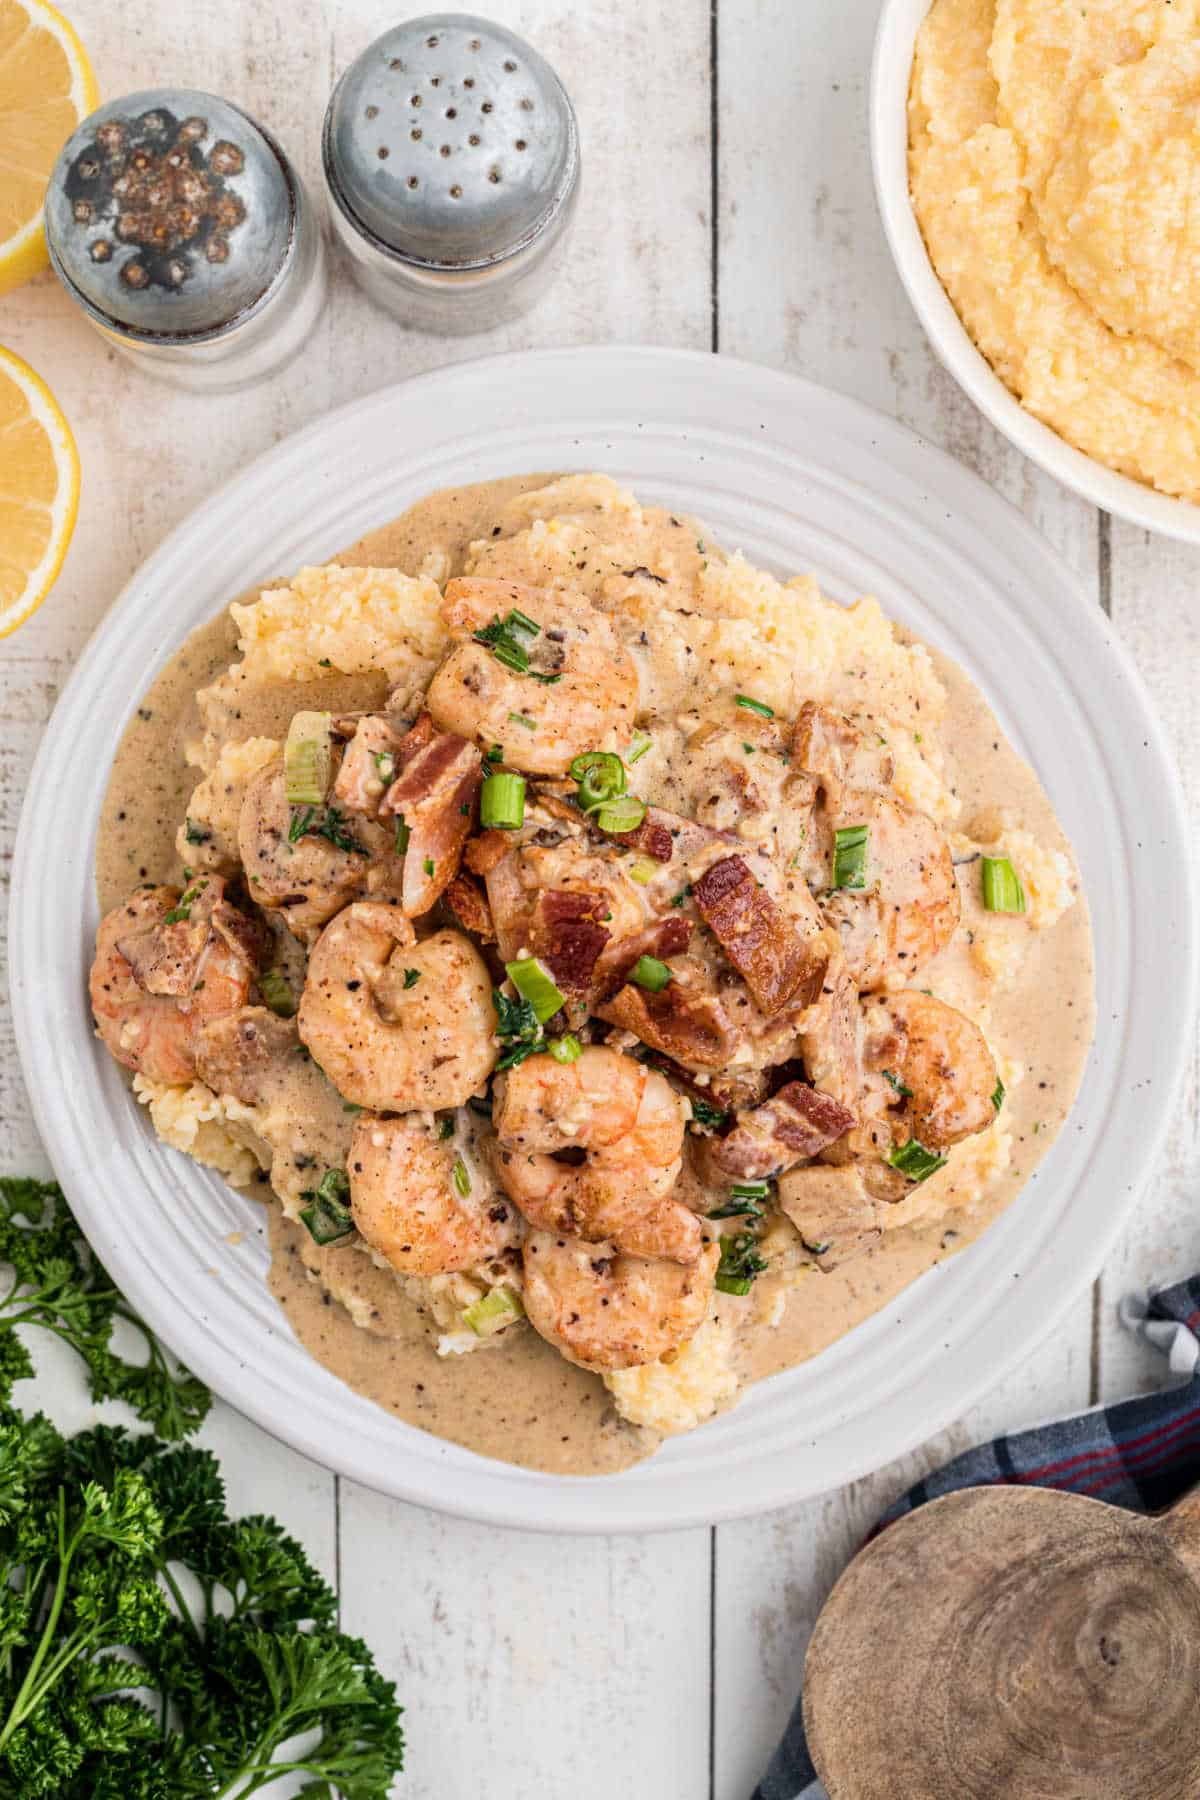 Overhead shot of a plate of Creole shrimp and grits.